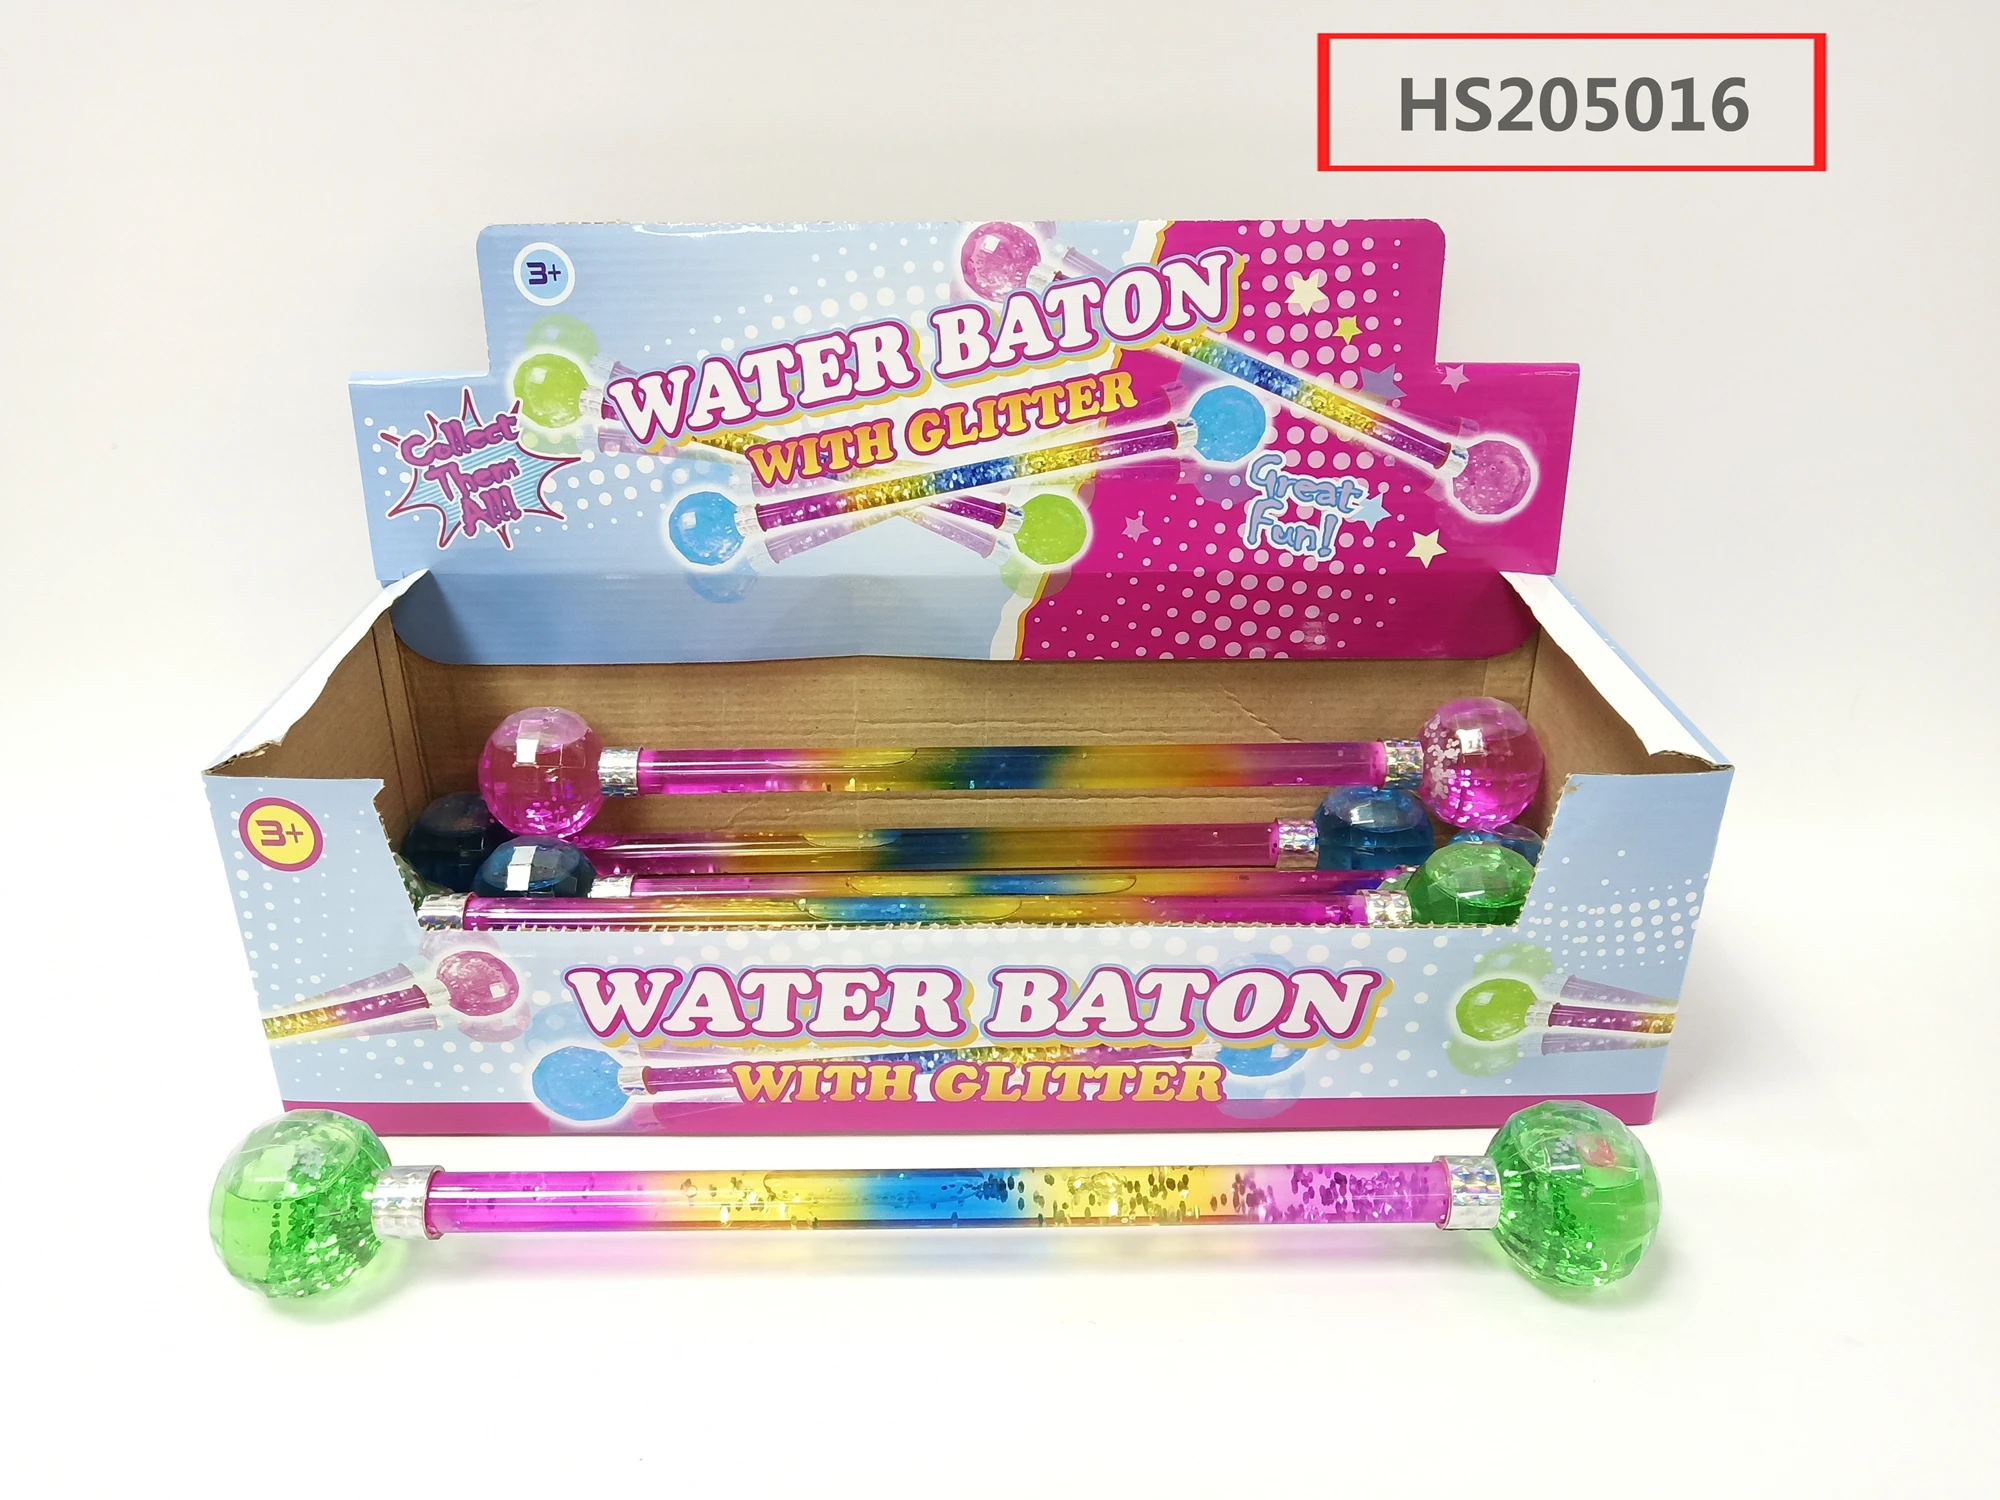 HS205016, Huwsin Toys, Dollar shop Water baton with glitter toy